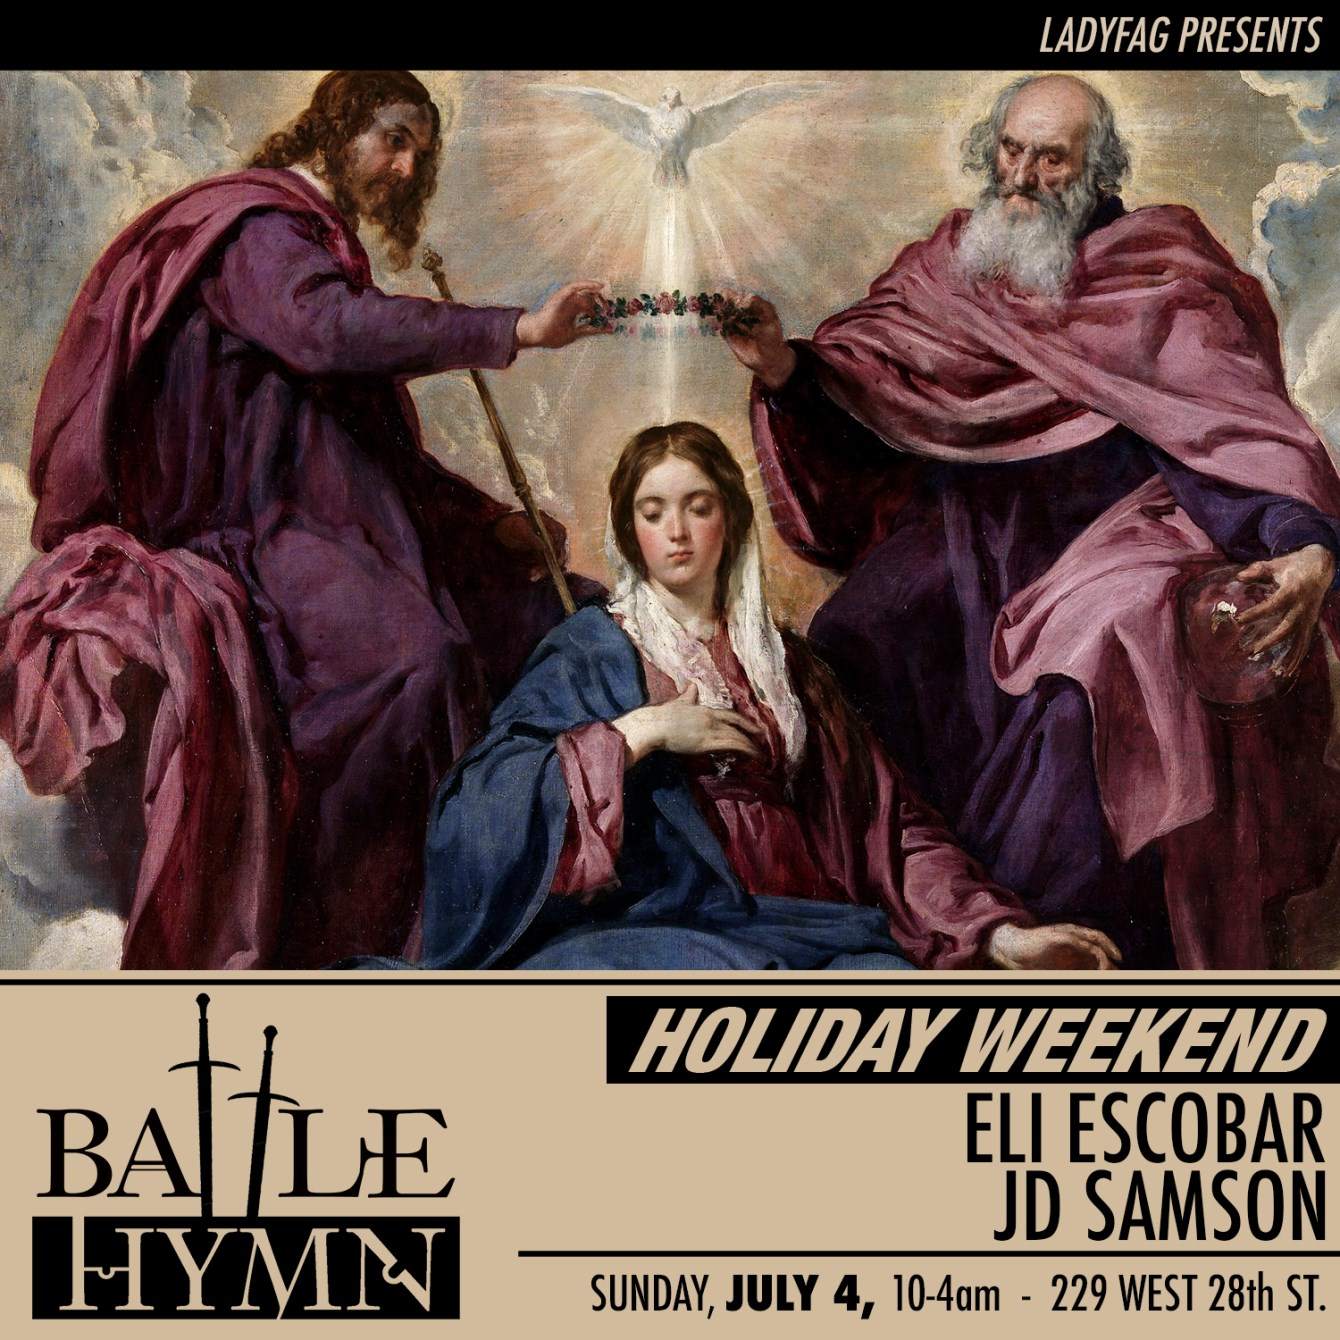 Battle Hymn 4th of July Holiday Weekend - フライヤー表